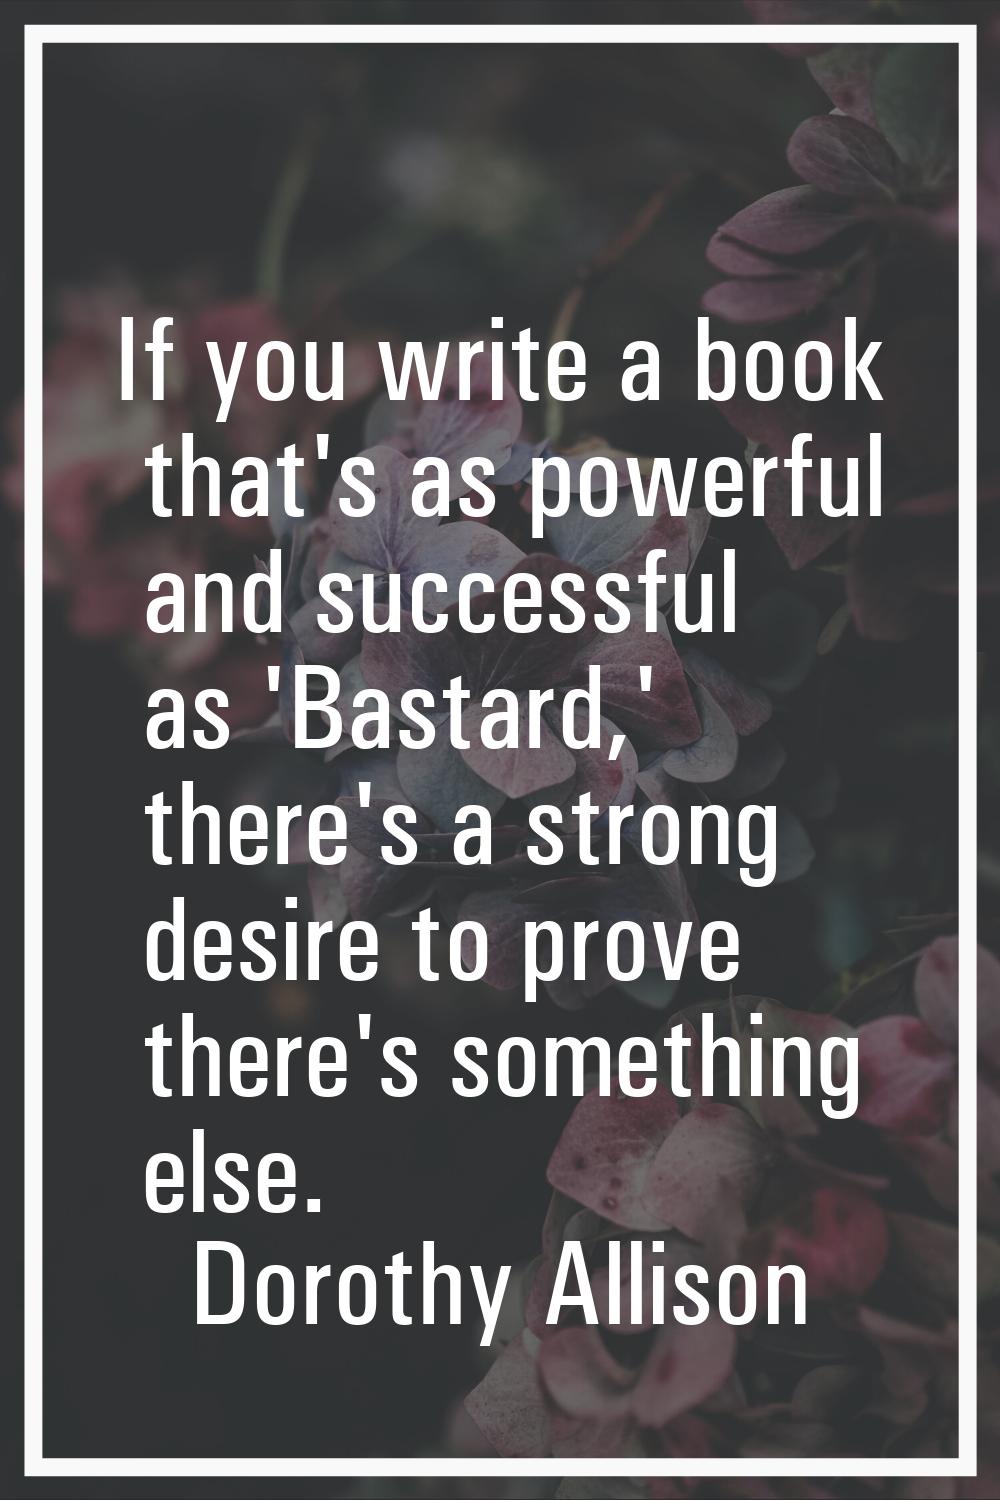 If you write a book that's as powerful and successful as 'Bastard,' there's a strong desire to prov